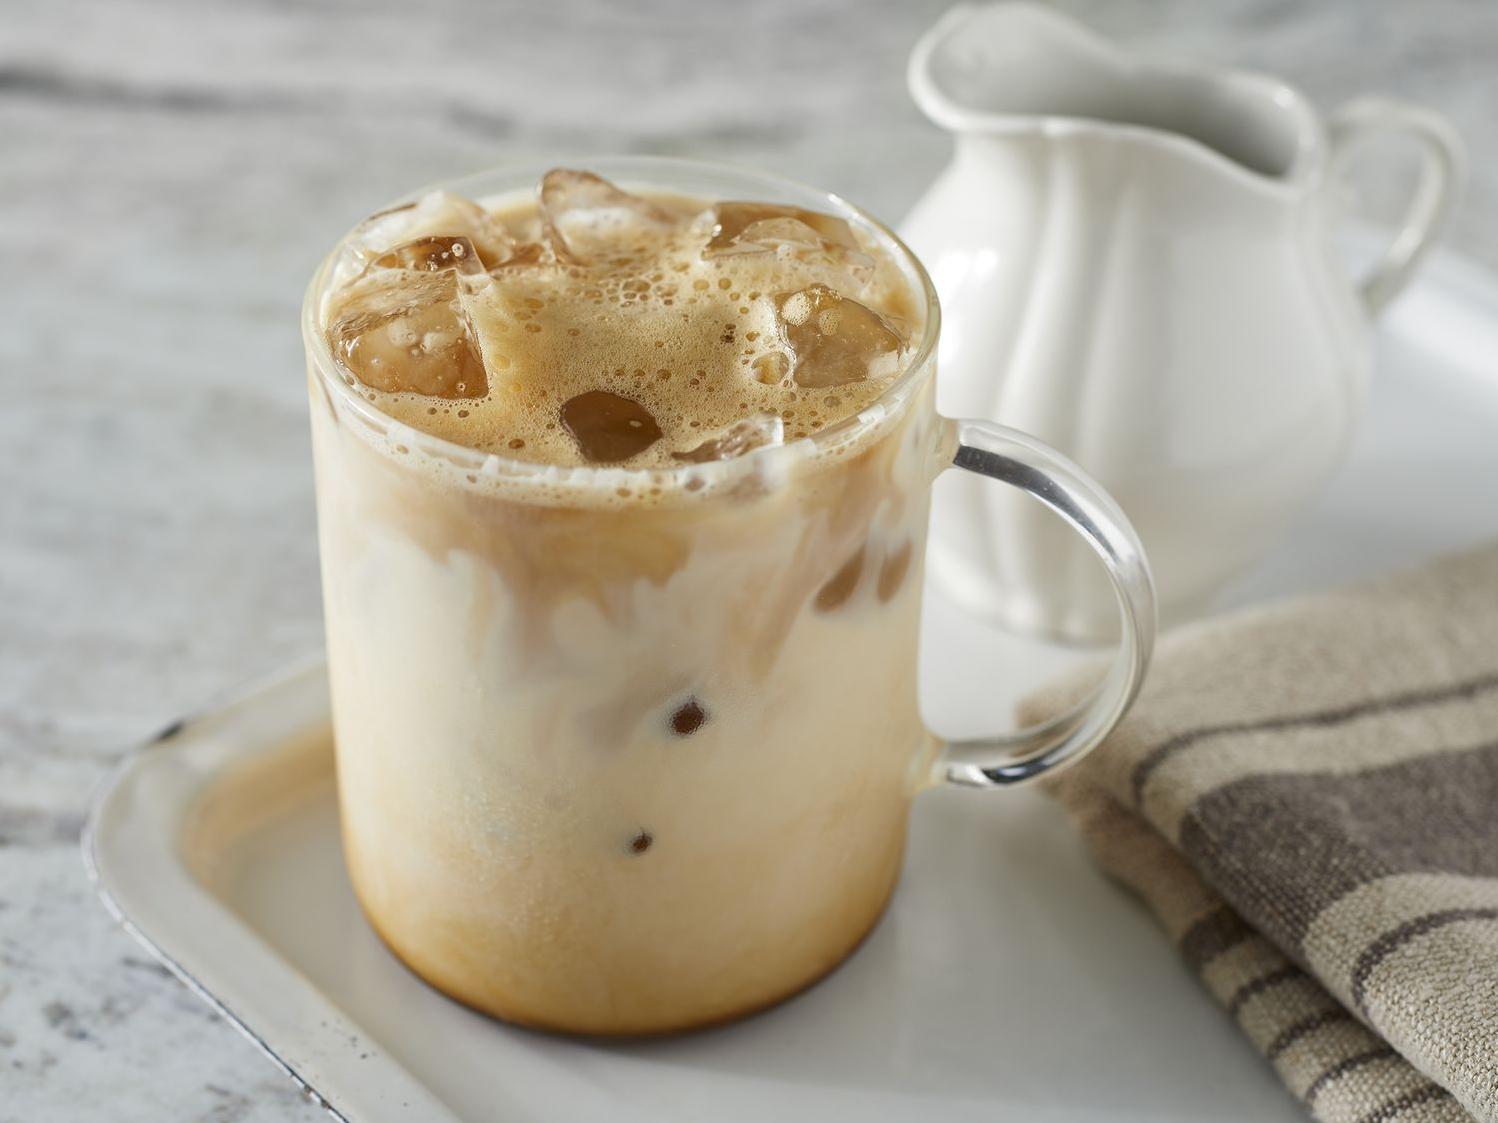  Enjoy the perfect blend of coffee and ice in one glass.